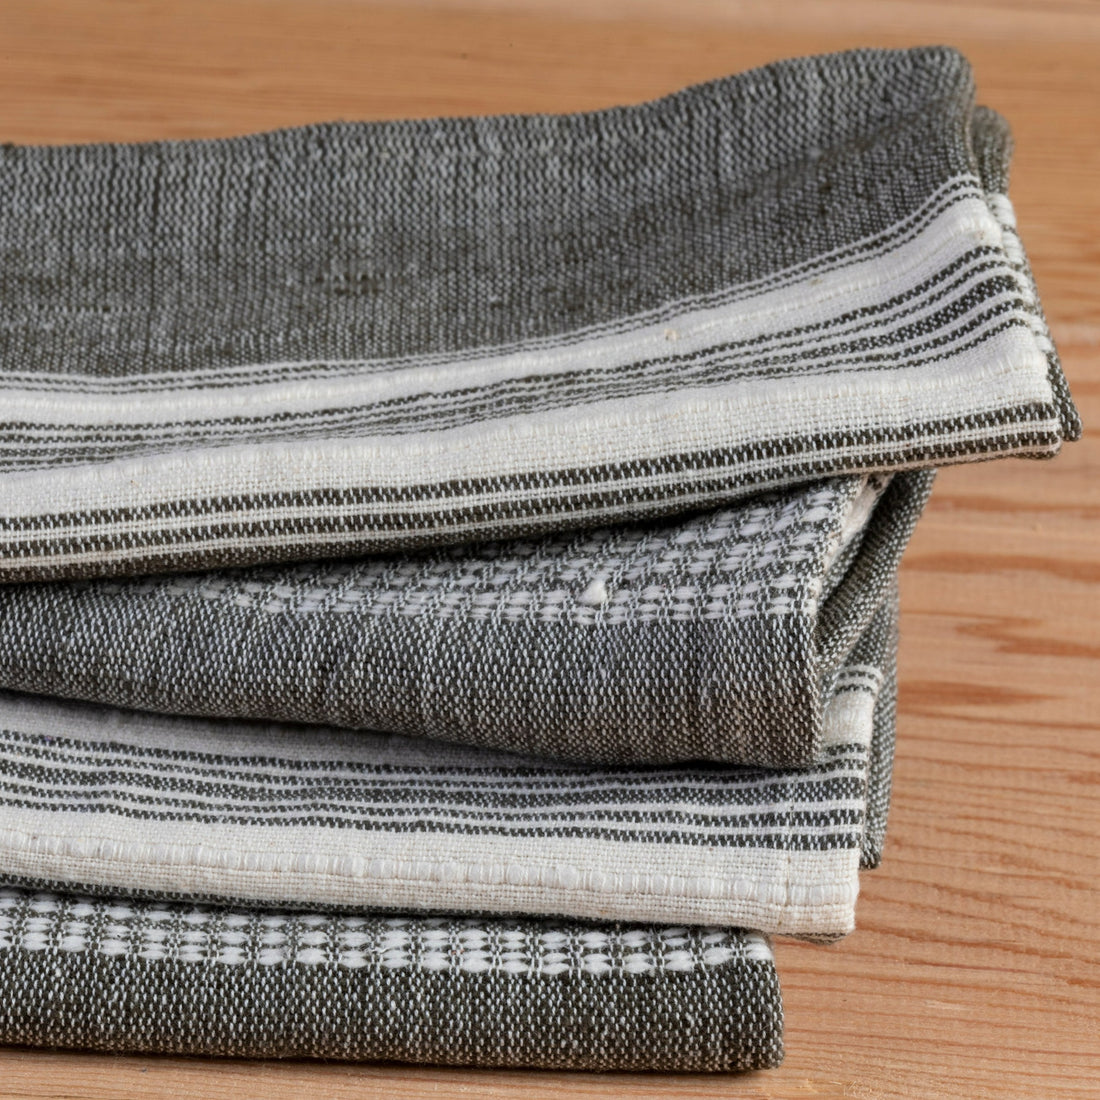 Aden Napkins, Grey with Natural, Set of 4